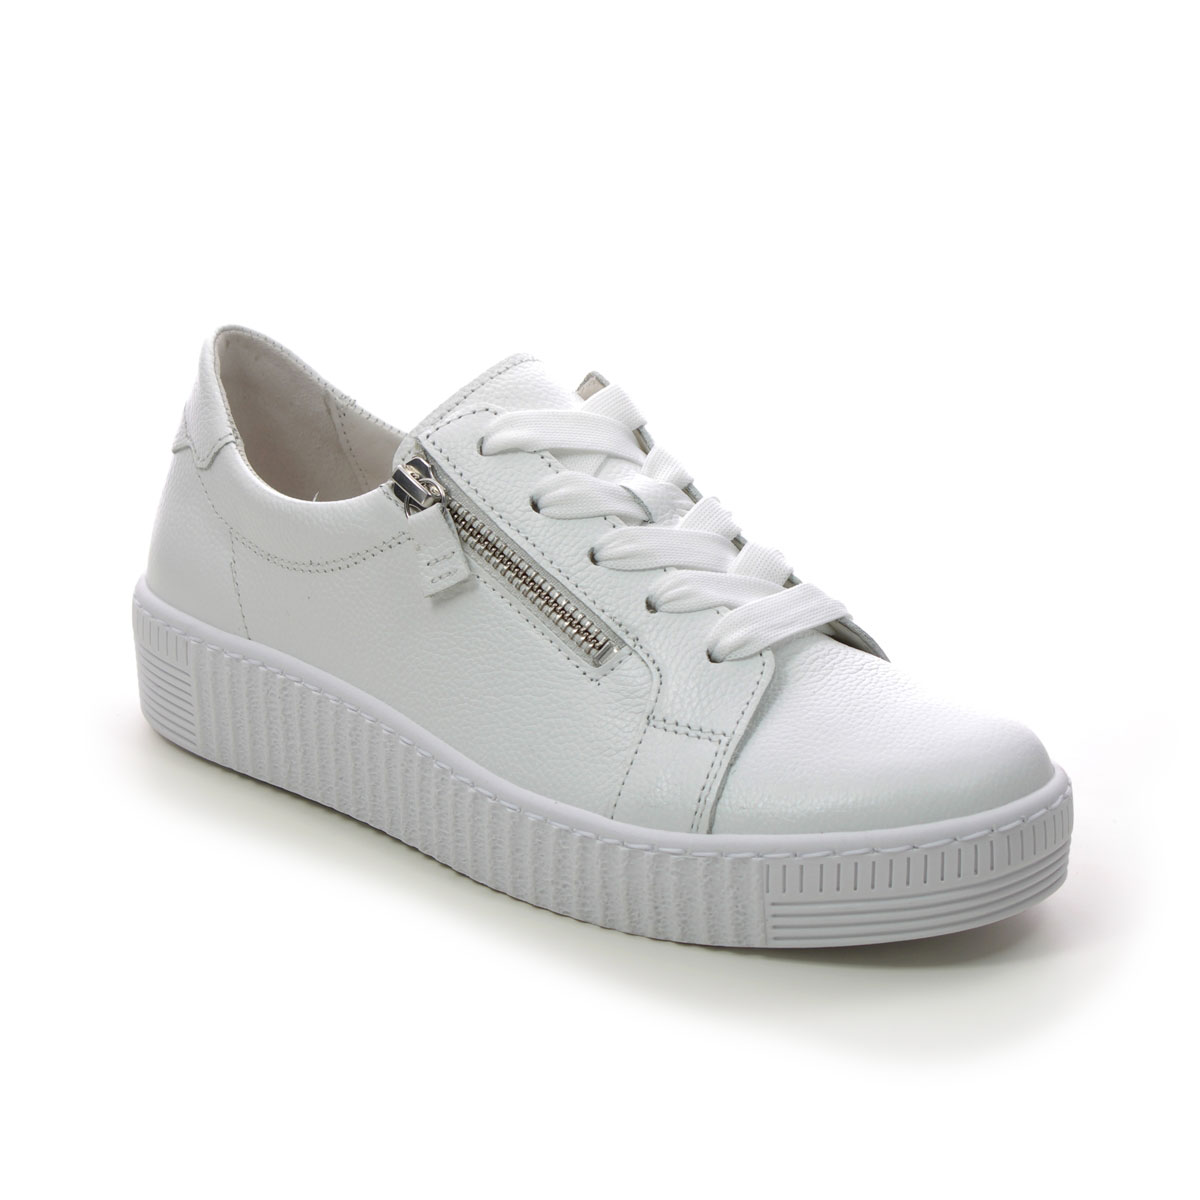 Gabor Wisdom WHITE LEATHER Womens trainers 43.334.21 in a Plain Leather in Size 6